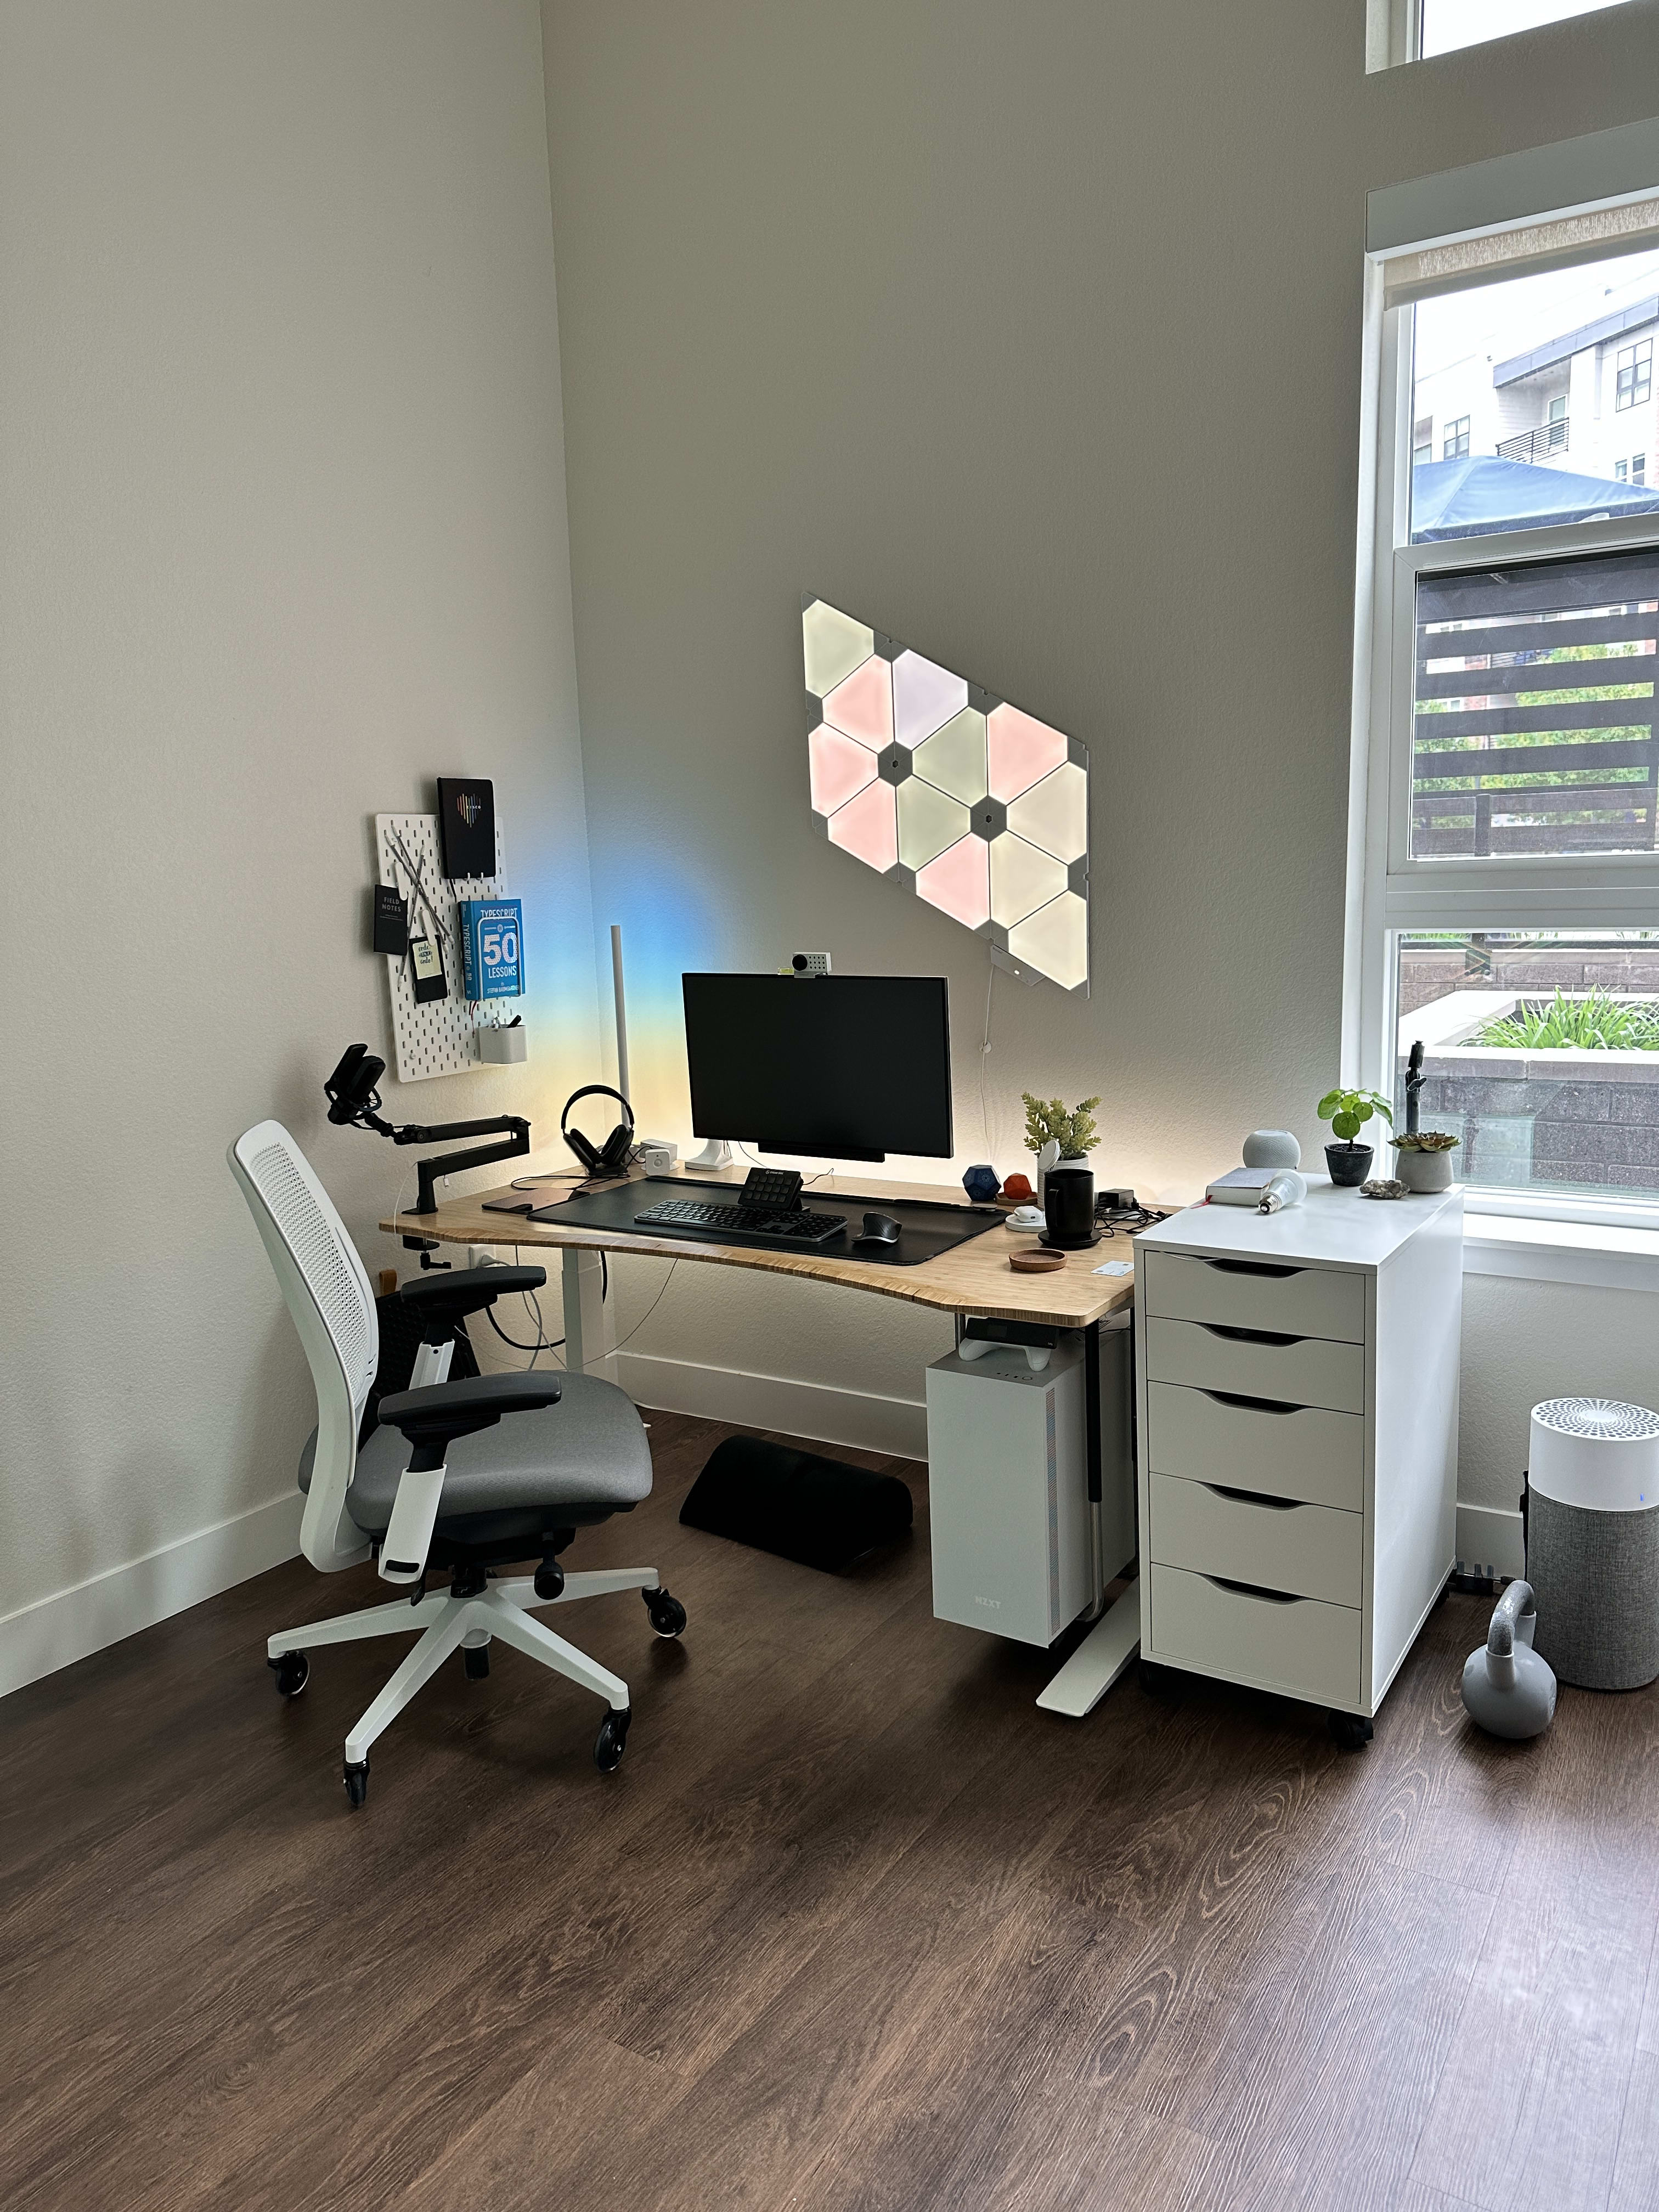 Redecorating & organizing my home office space, part 1: taking stock